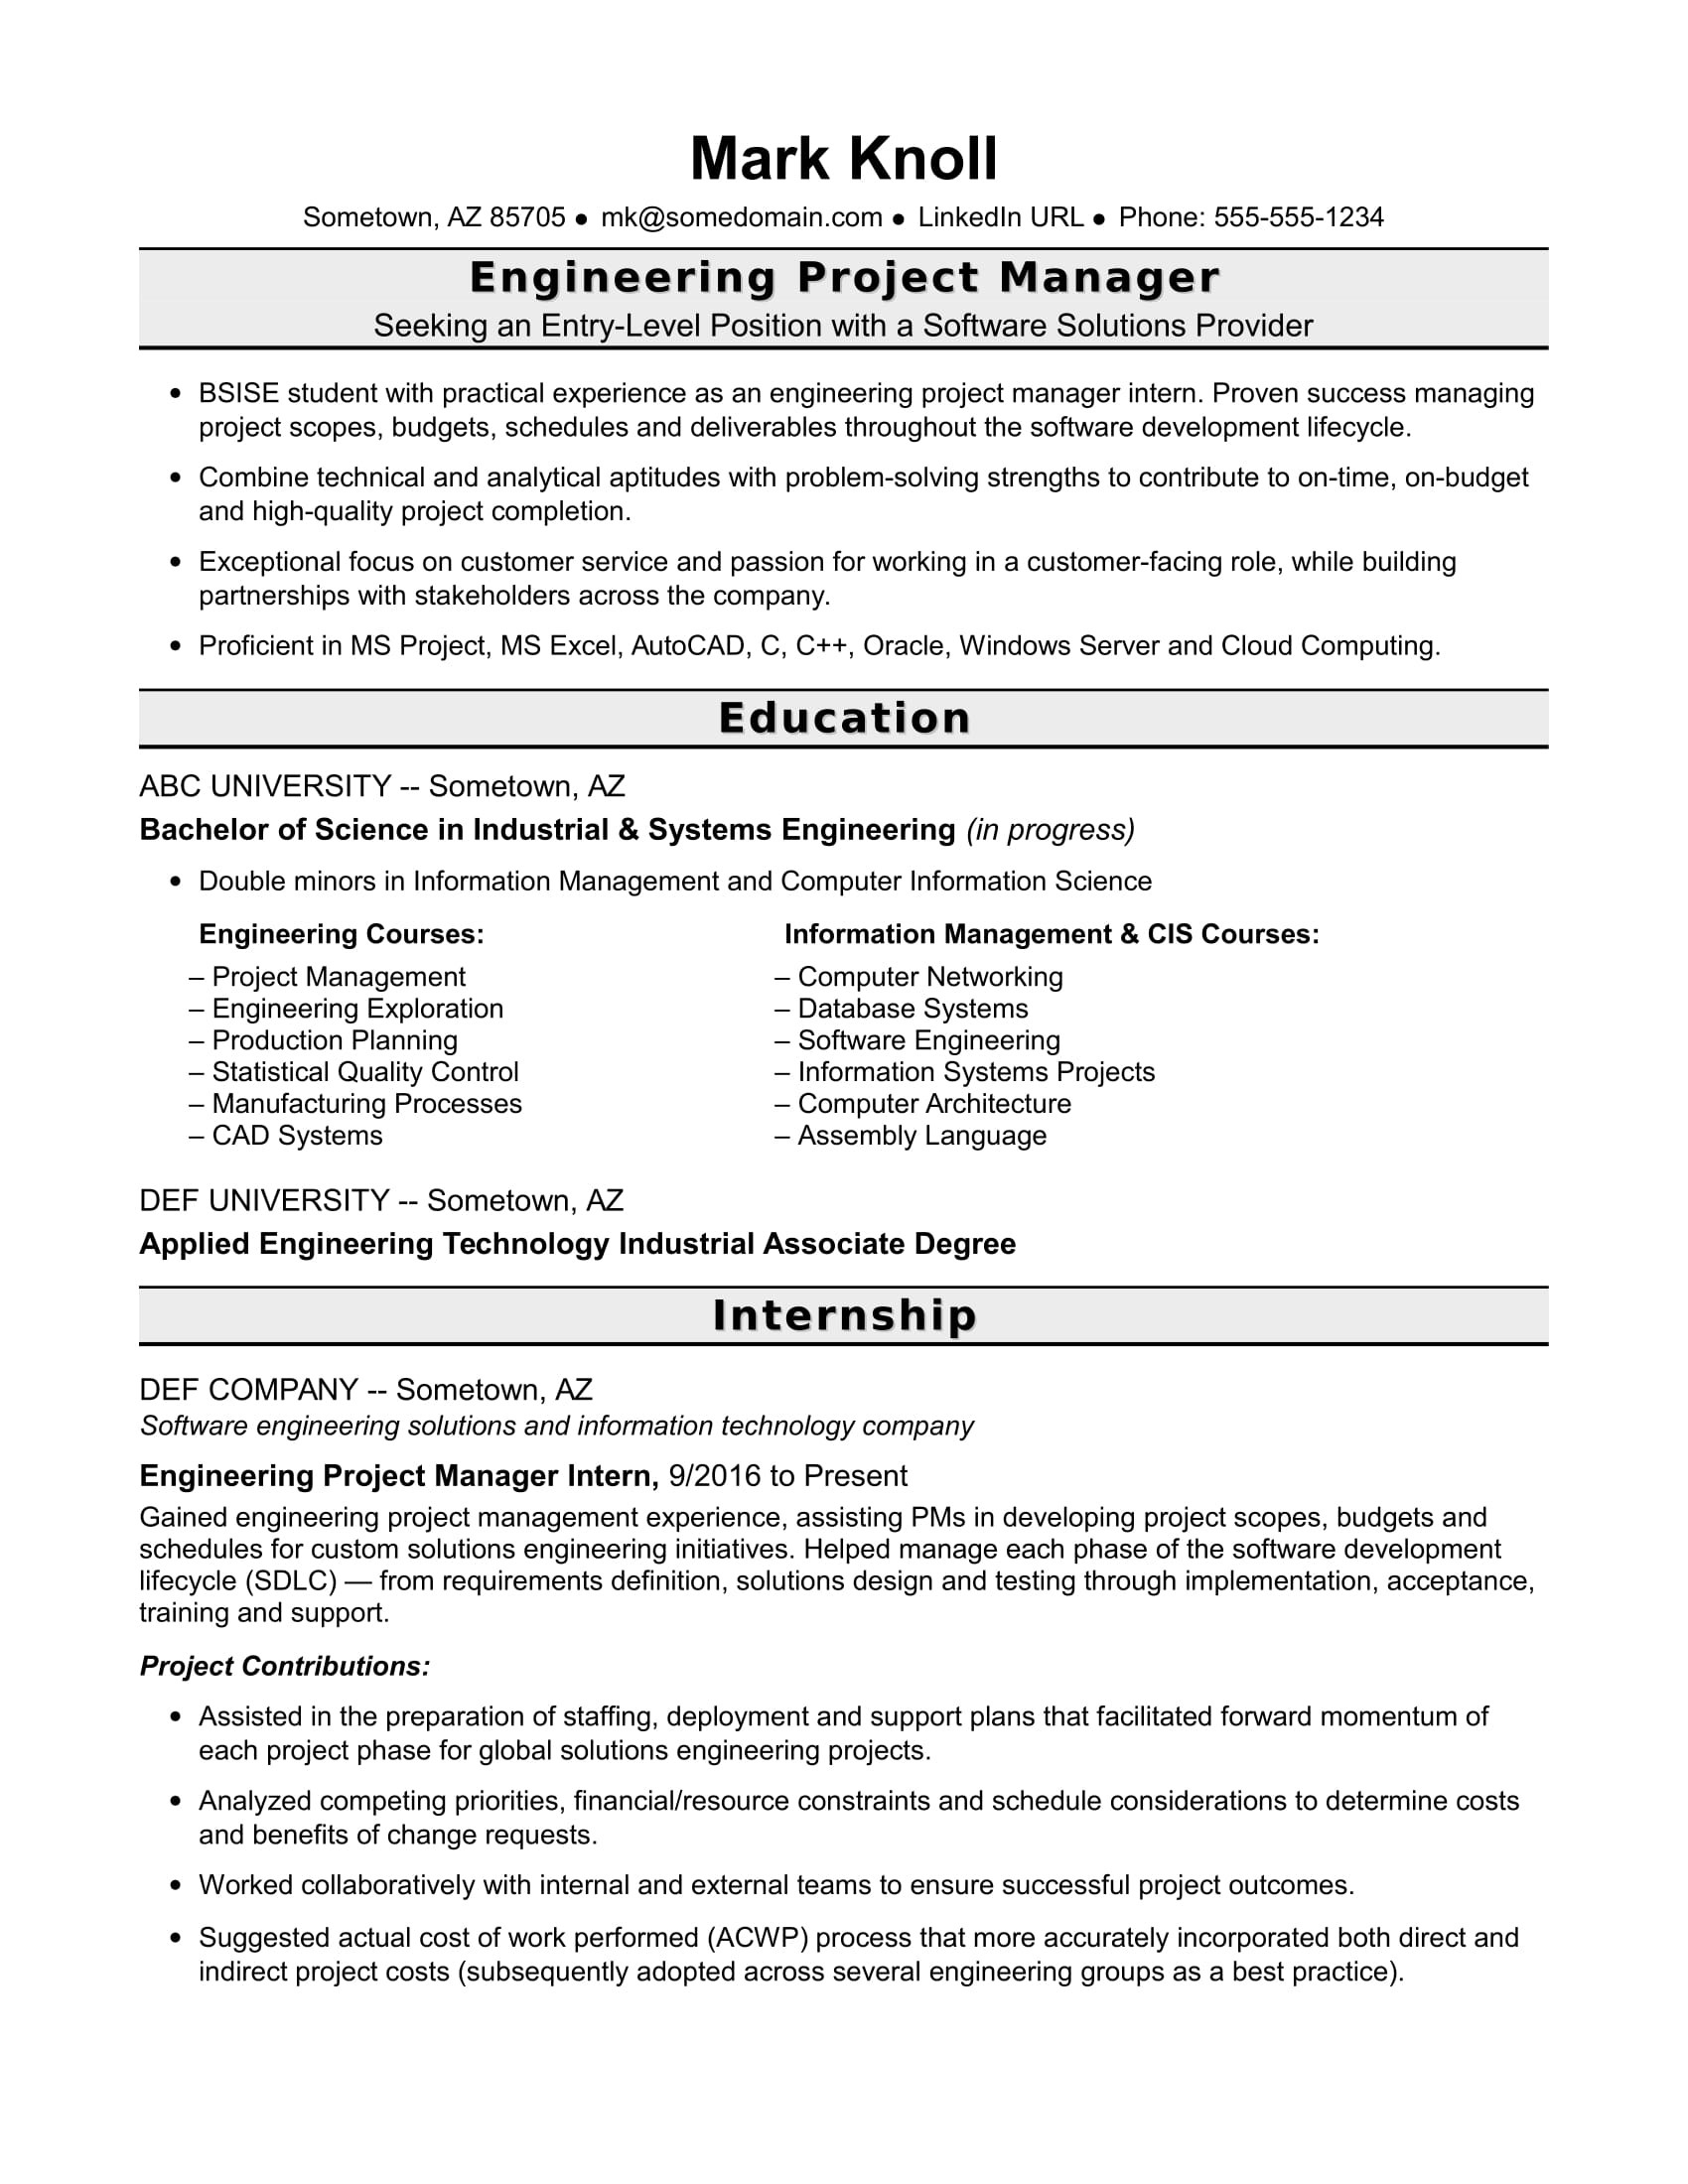 Software Engineer Resume Sample Monster Entry Level Entry-level Project Manager Resume for Engineers Monster.com